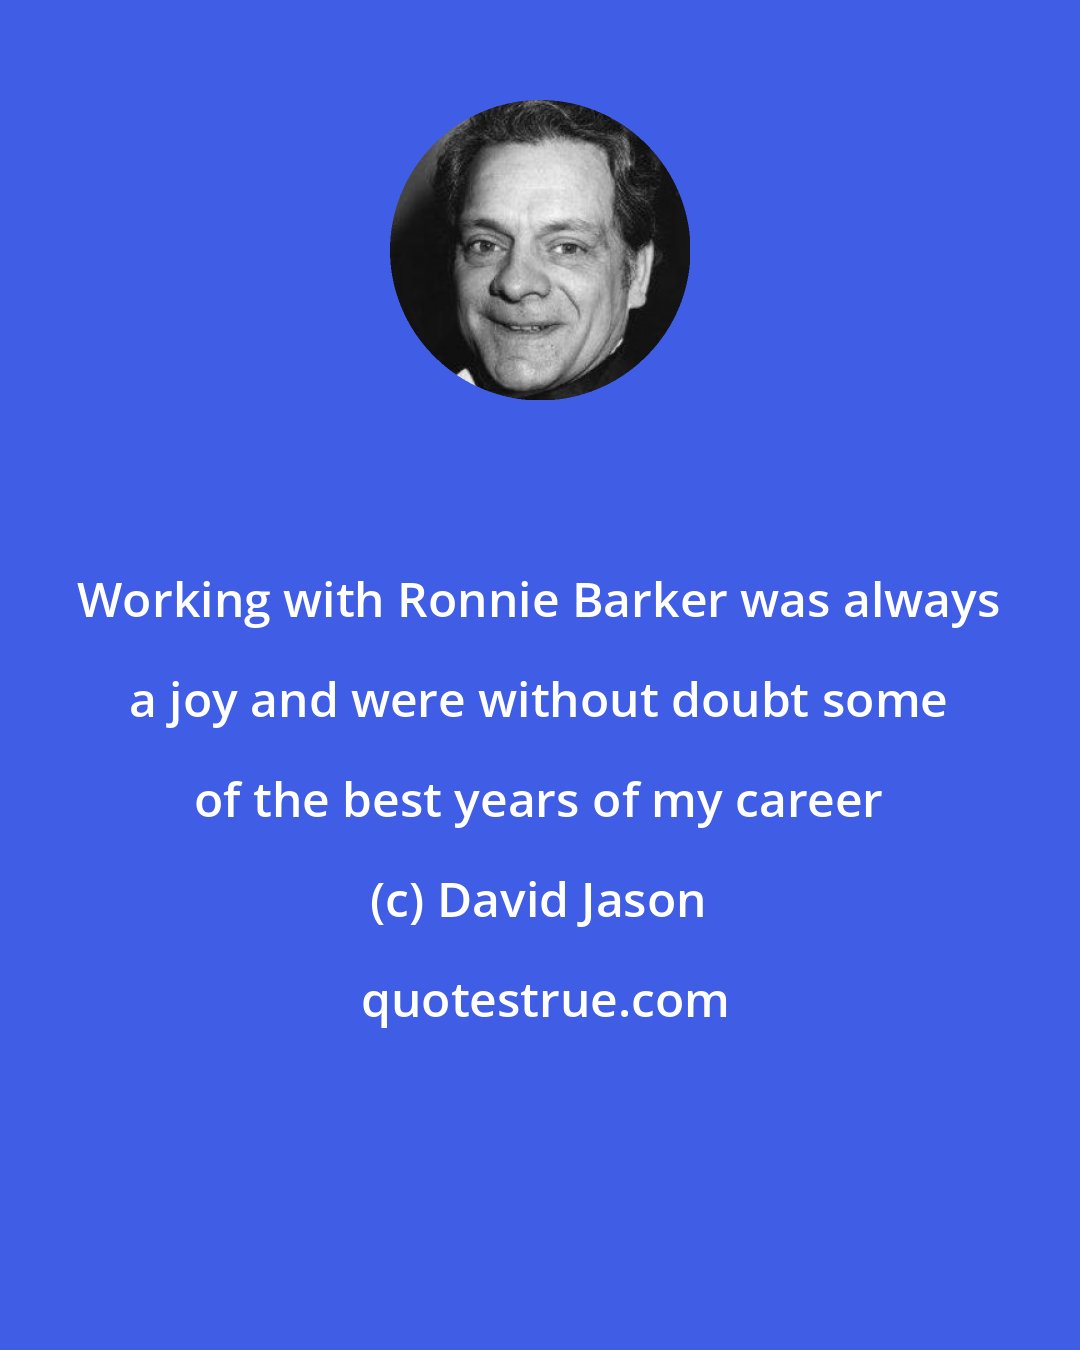 David Jason: Working with Ronnie Barker was always a joy and were without doubt some of the best years of my career